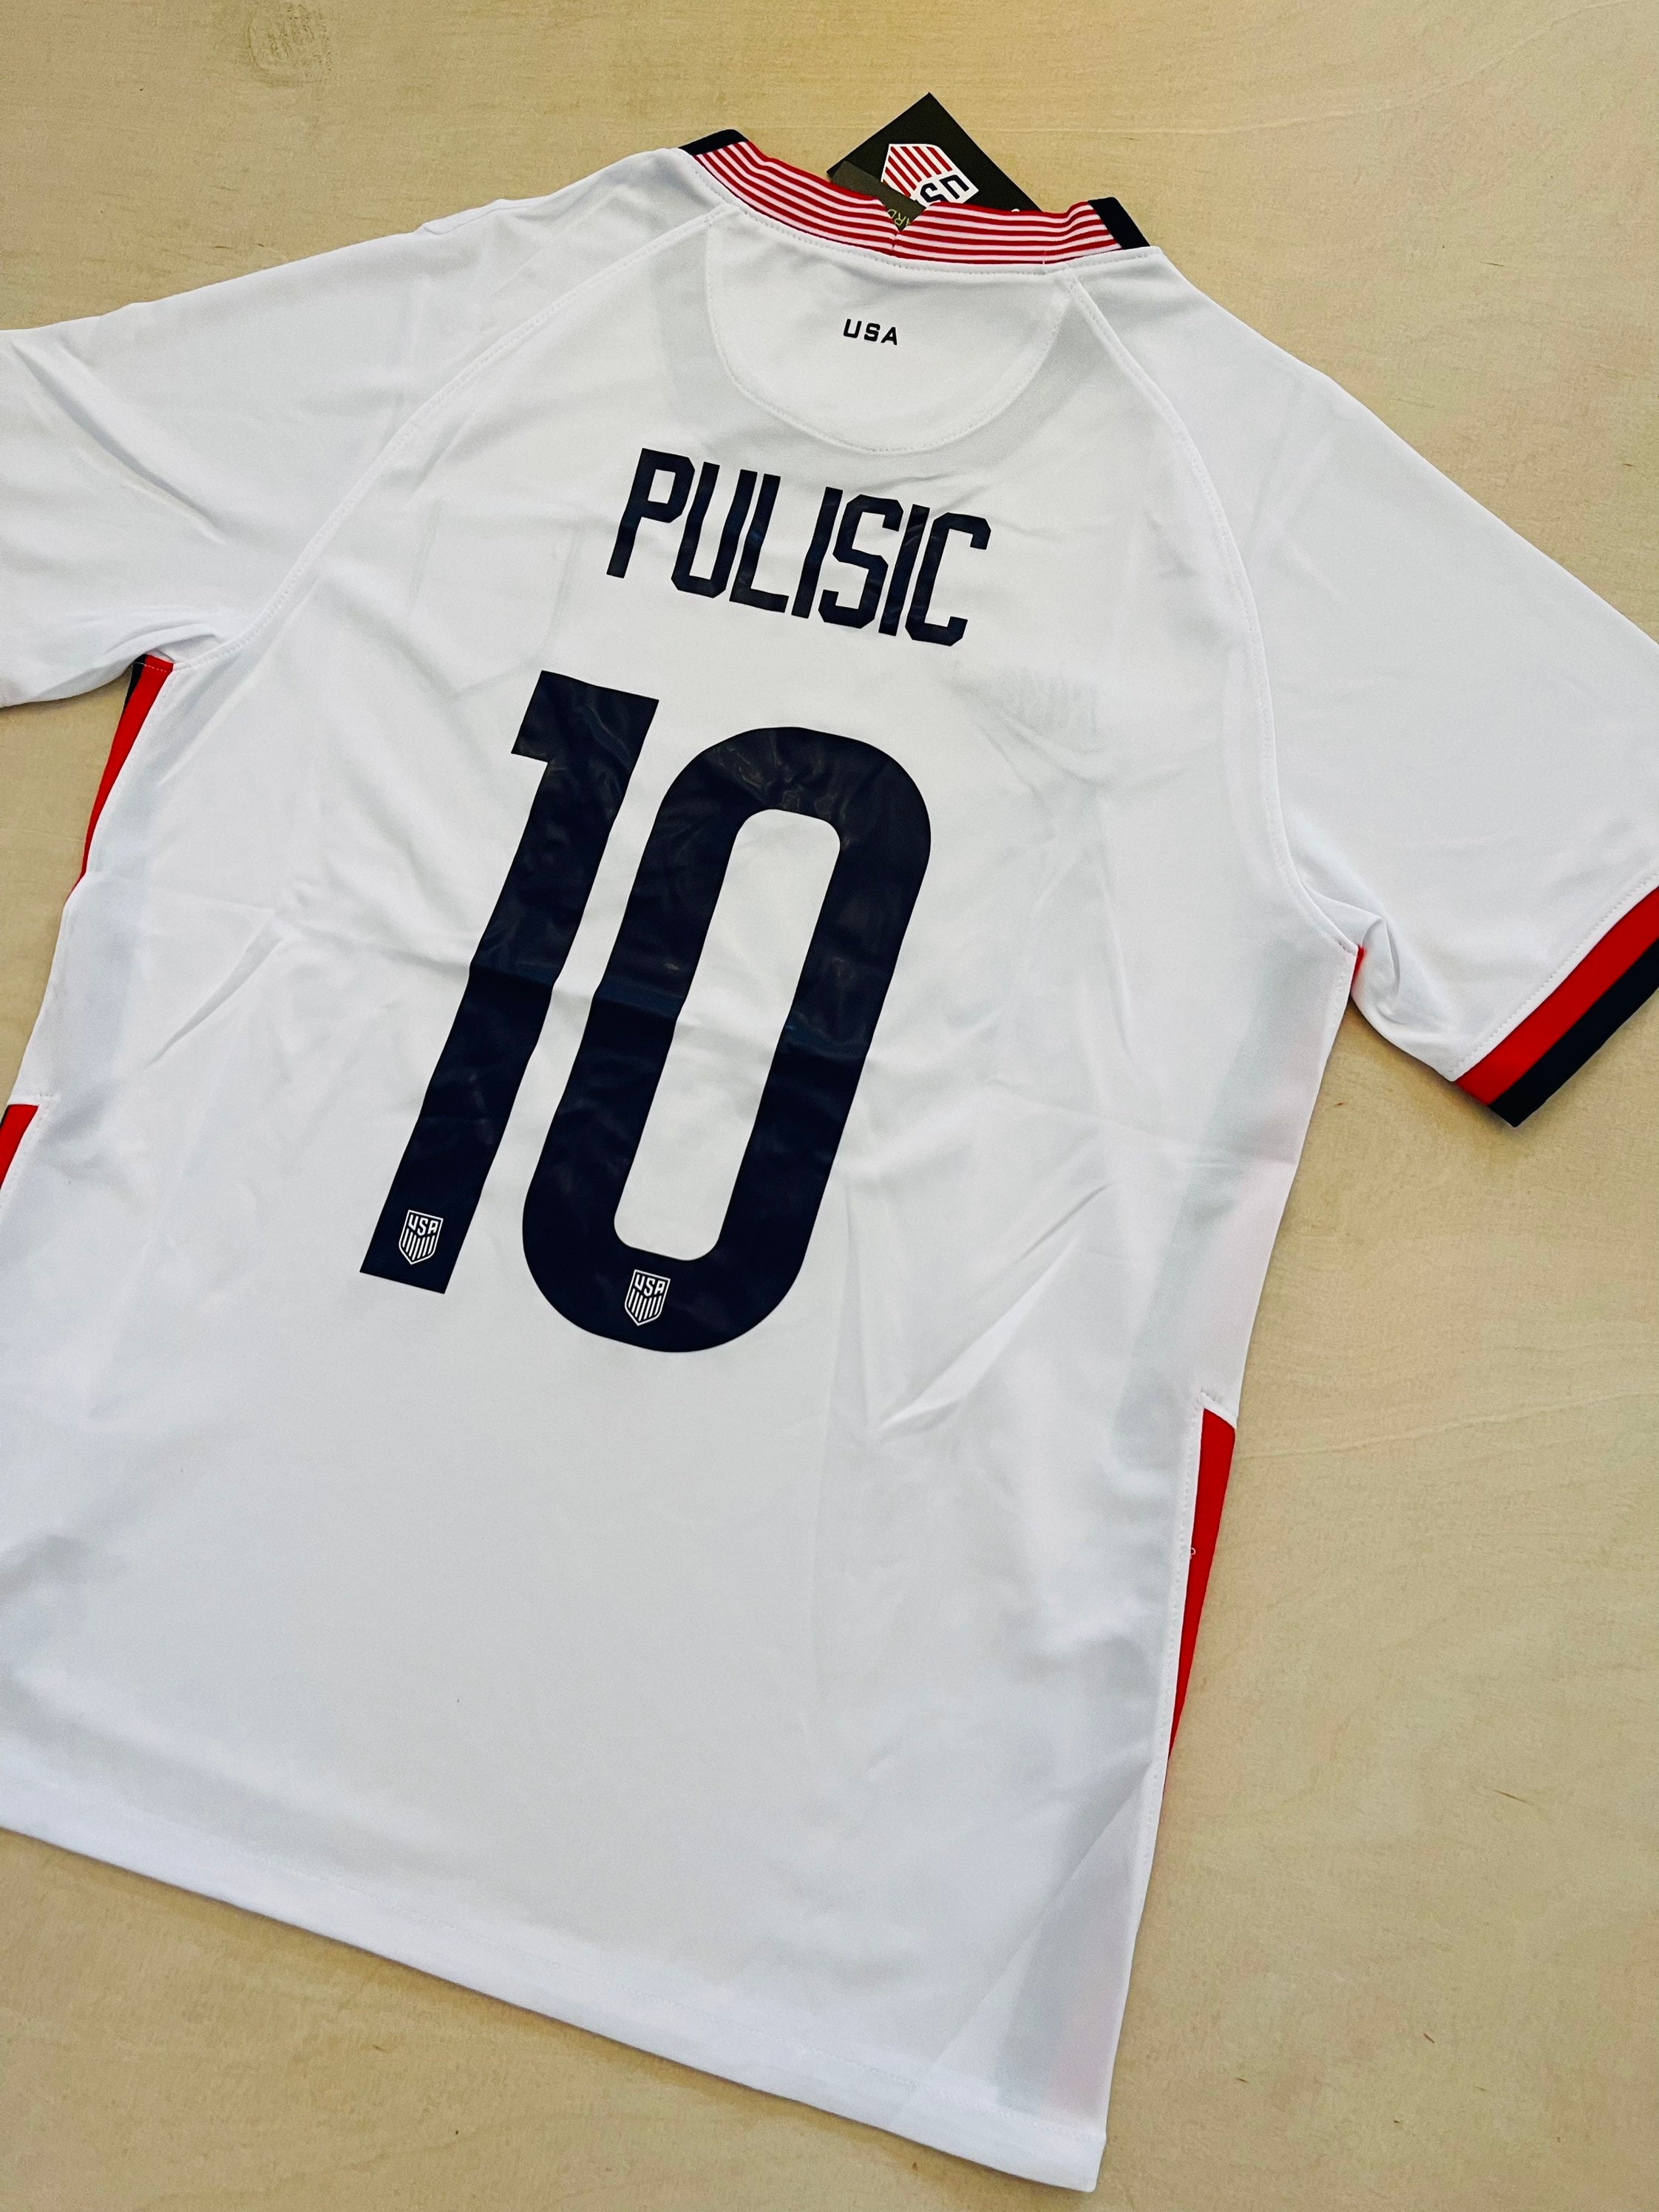 Pulisic 10 USA Home soccer jersey 20/21 | Etsy